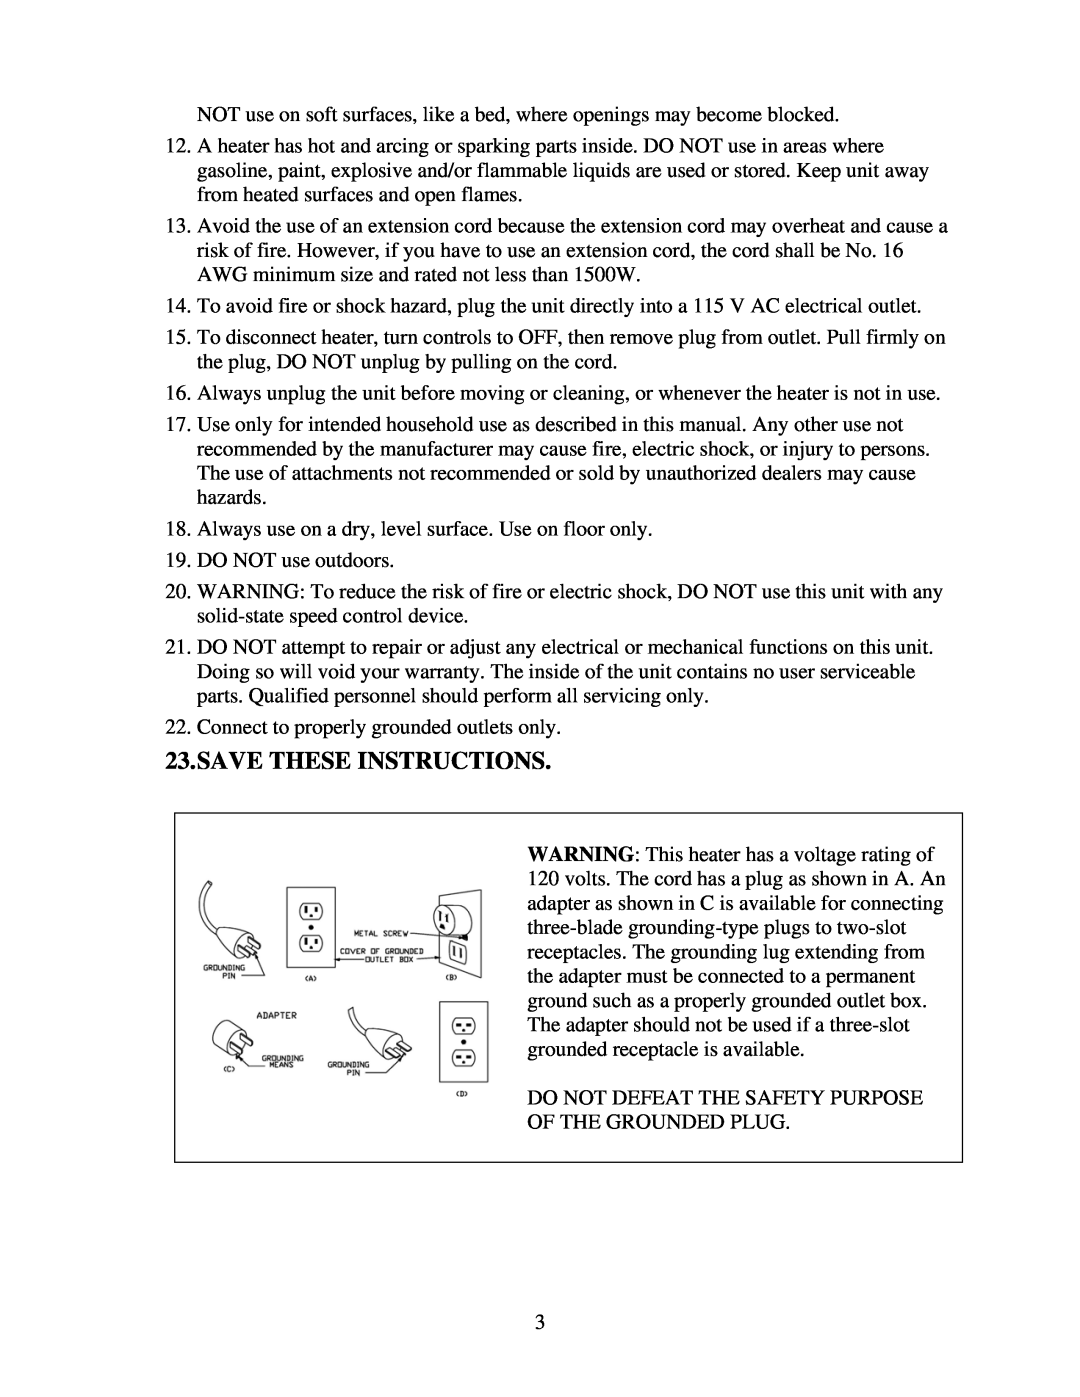 Soleus Air HM4-15R-01 owner manual Save These Instructions 